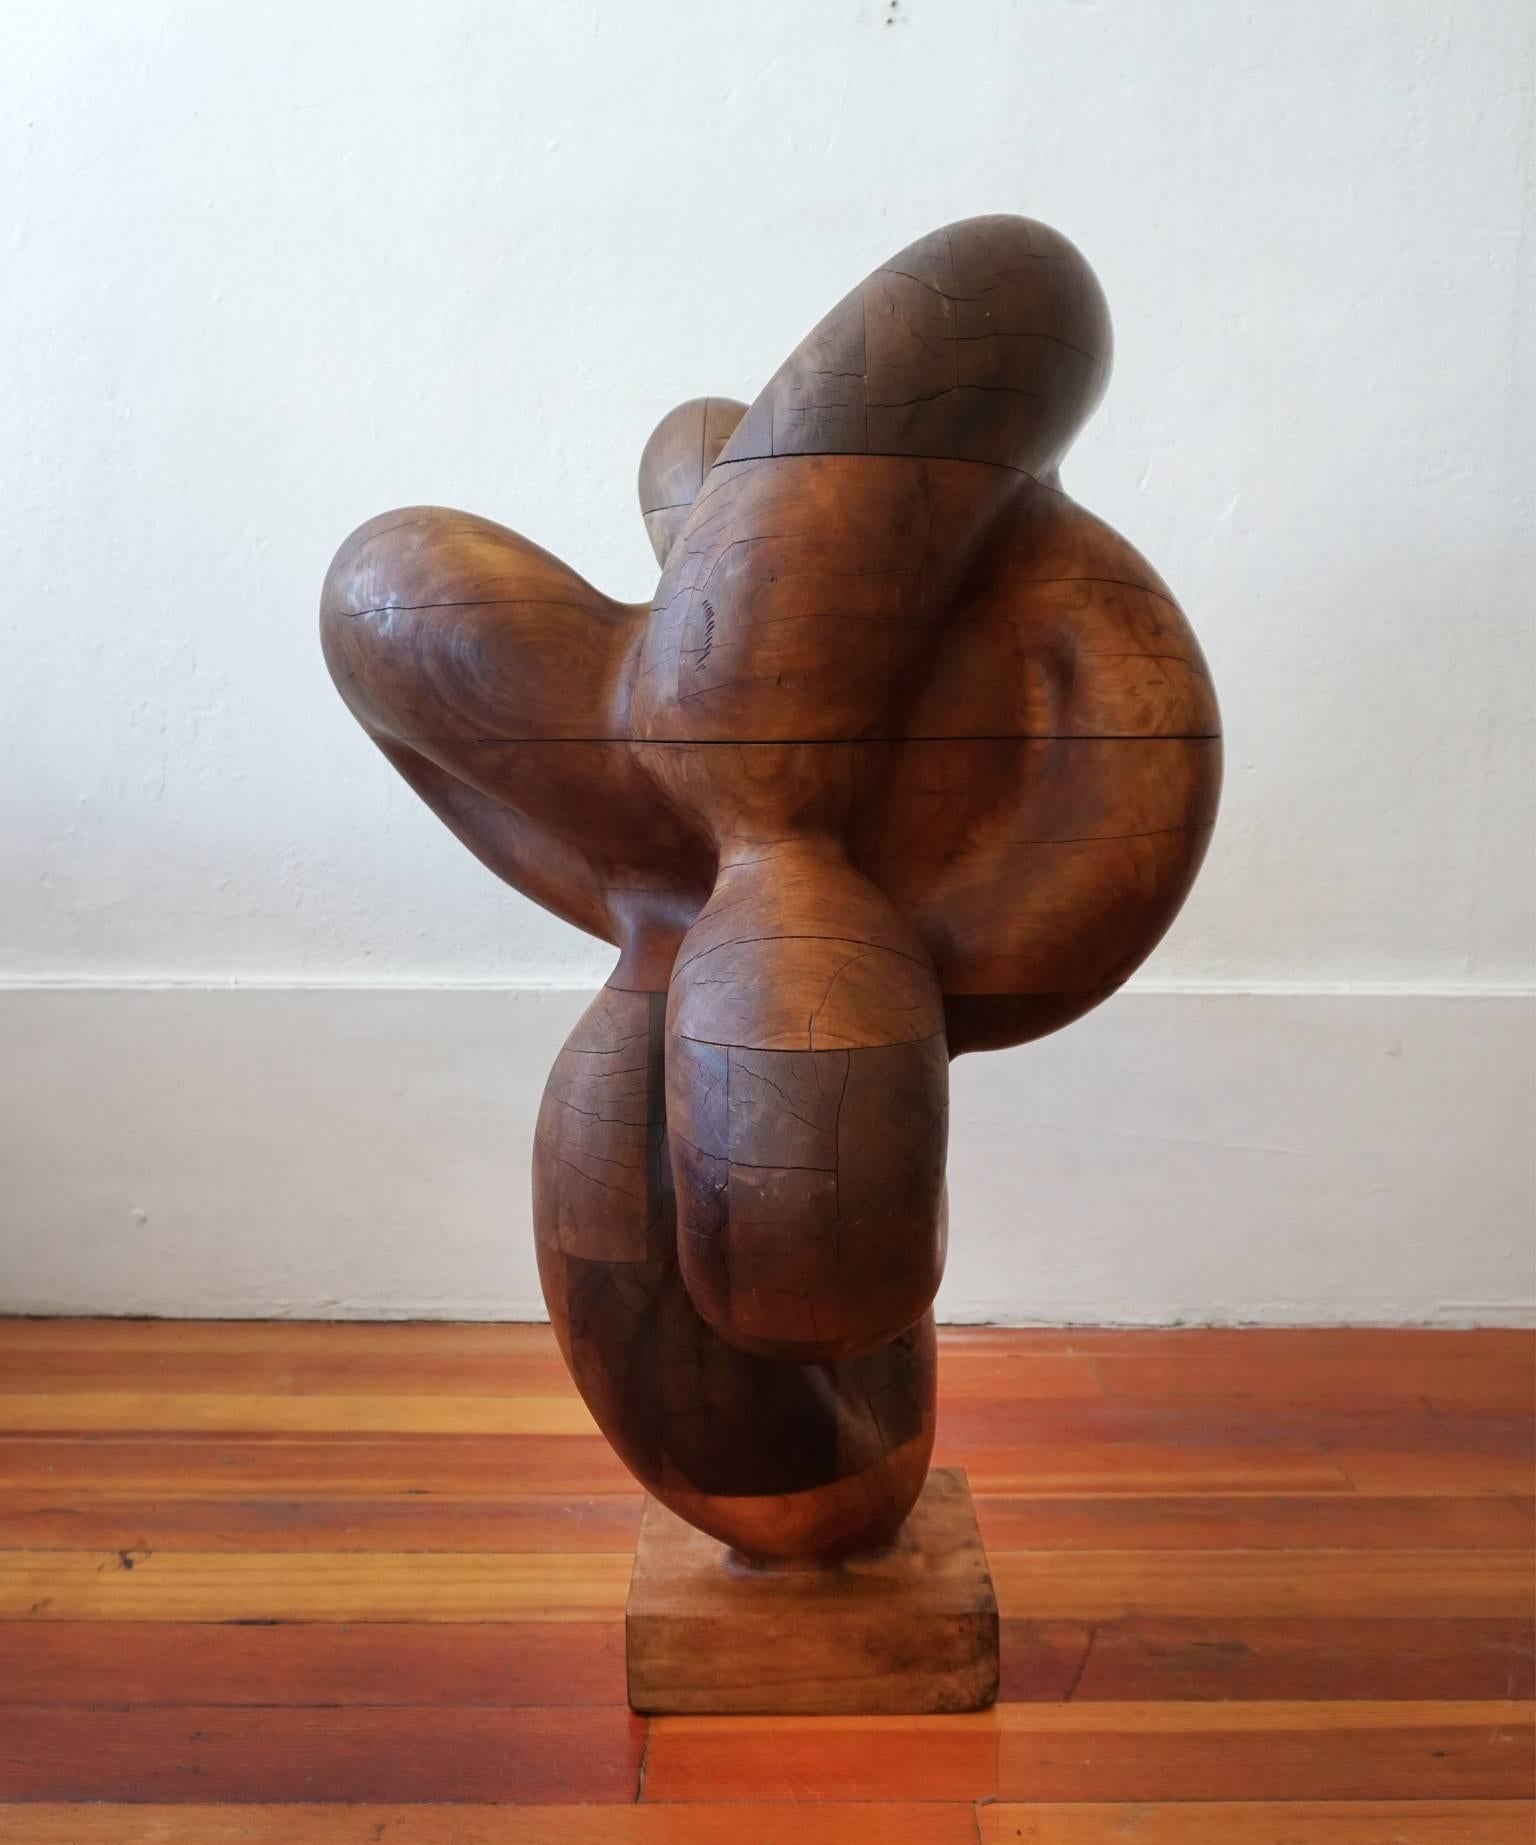 Large hand-carved solid wood sculpture. Impressive organic form by an obviously skilled artist. Unsigned, 1960s.